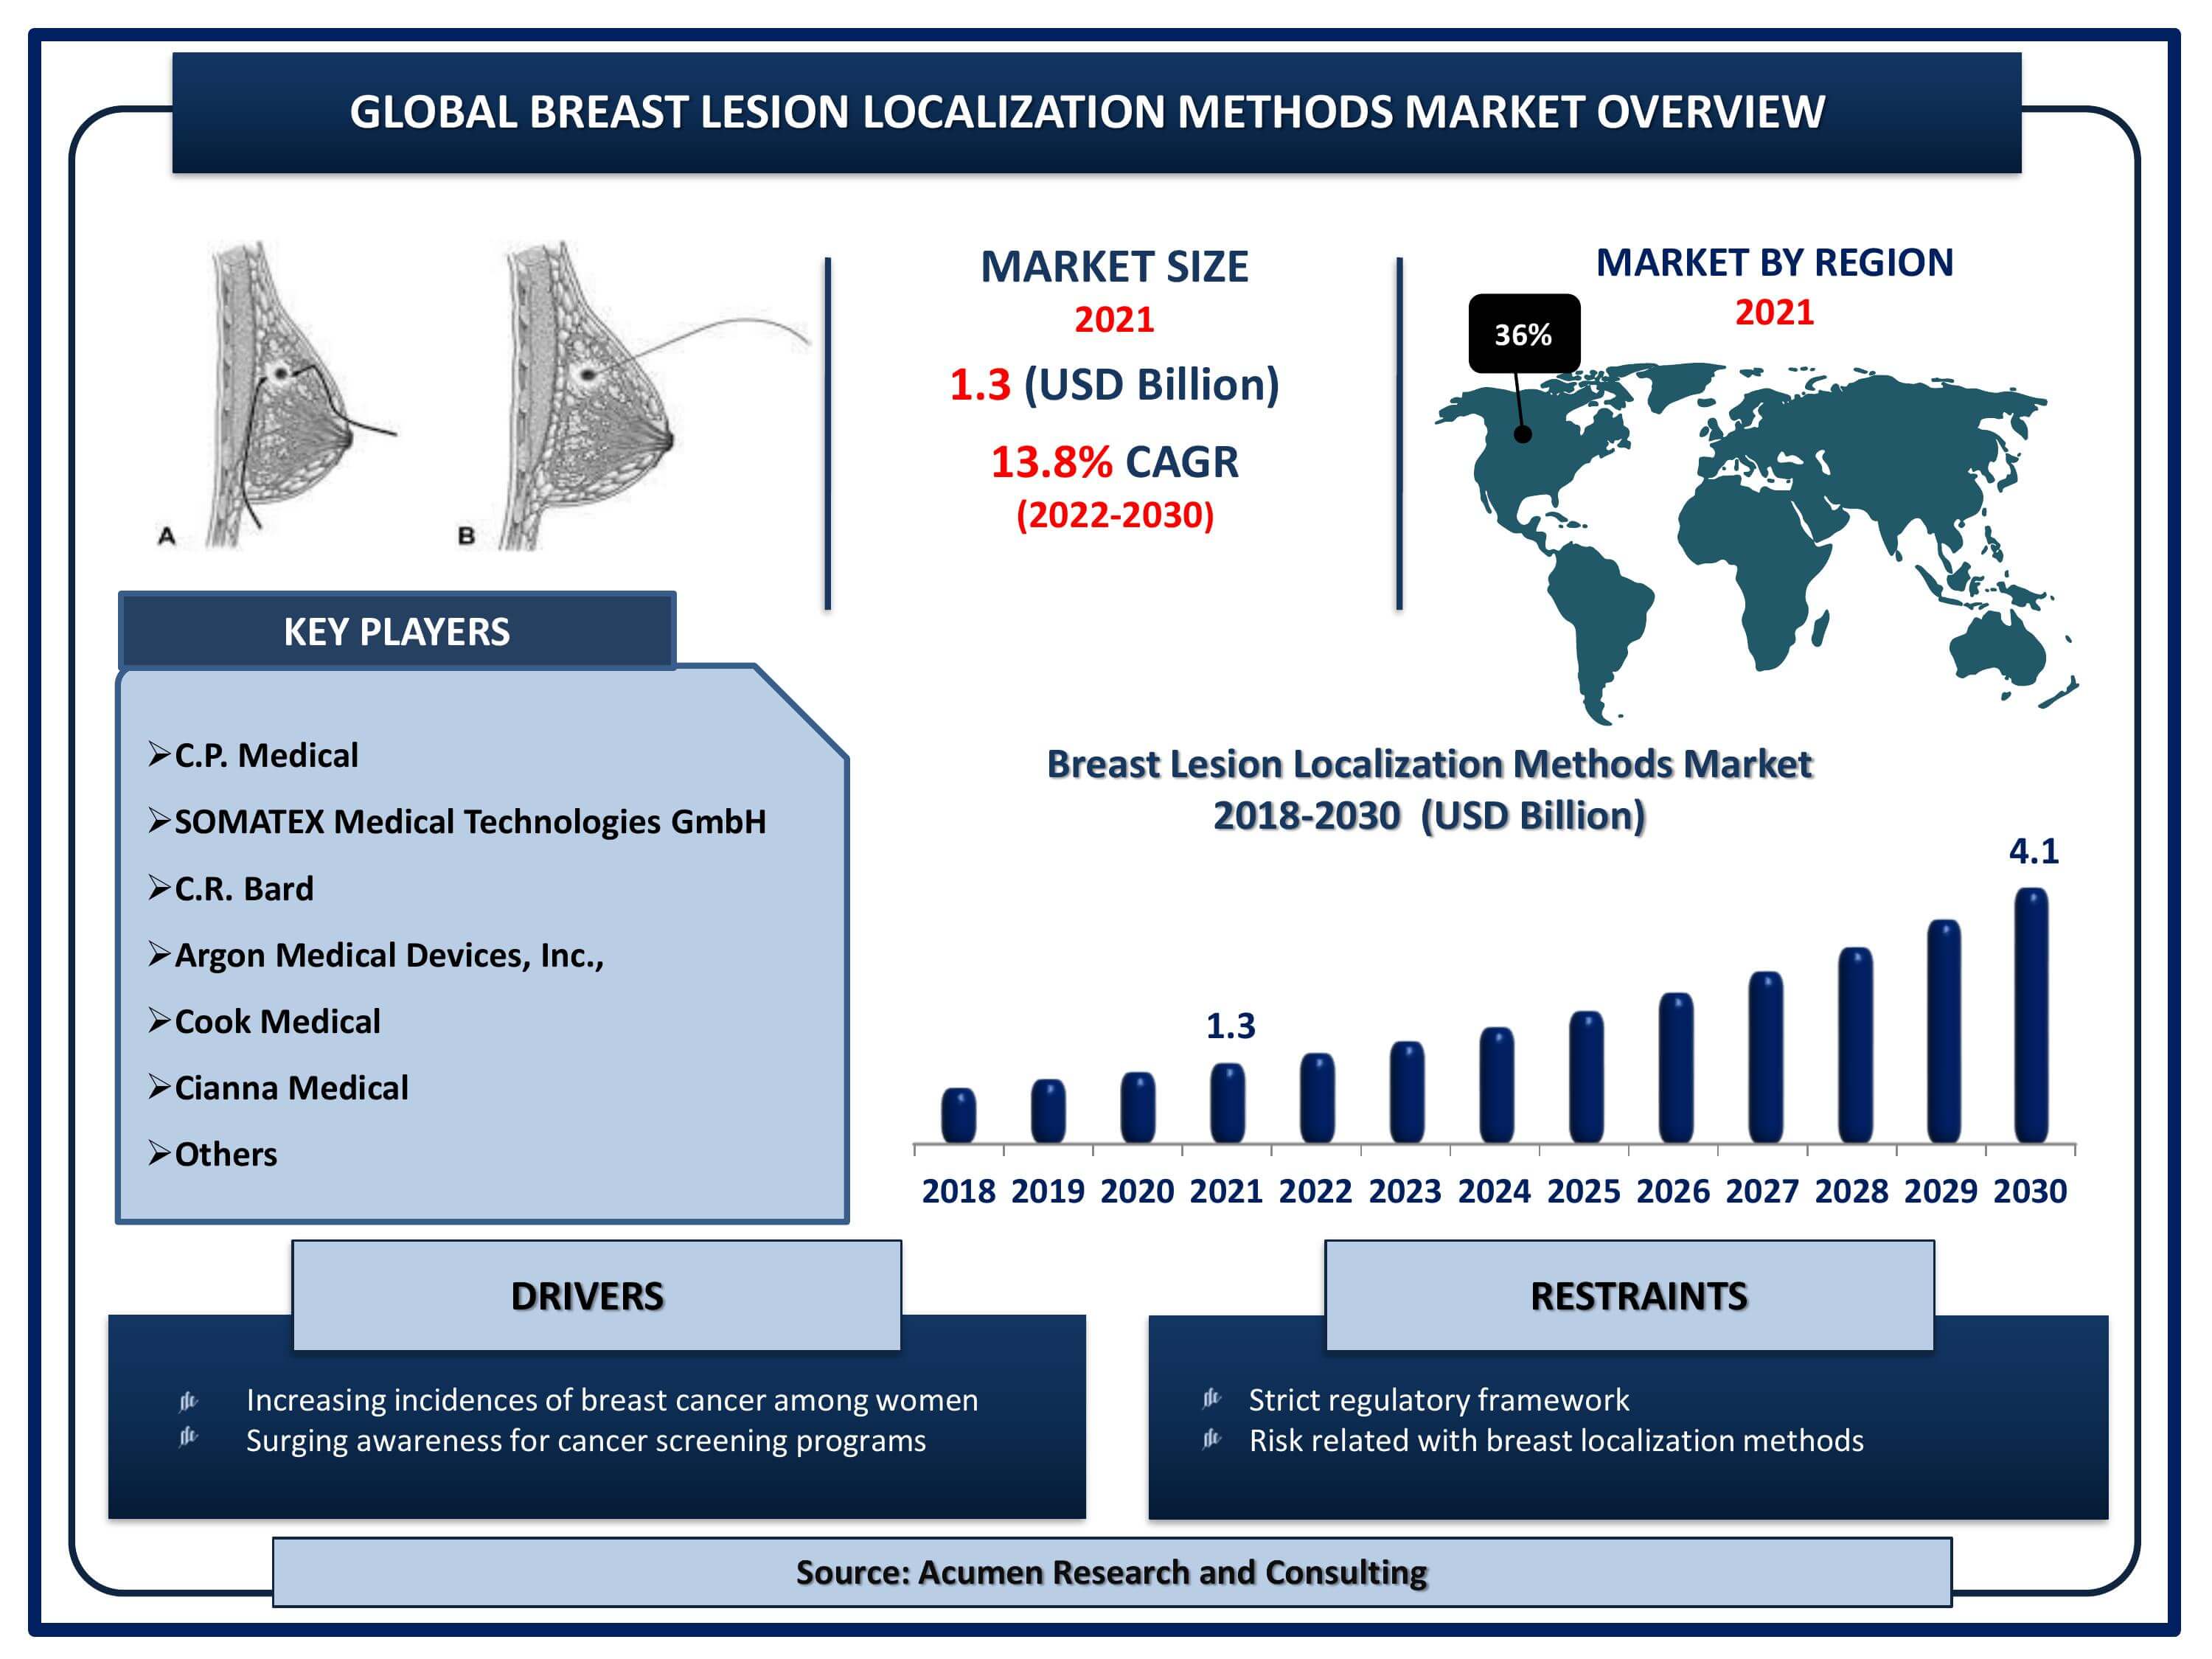 Global breast lesion localization methods market revenue is estimated to reach USD 4.1 Billion by 2030 with a CAGR of 13.8% from 2022 to 2030